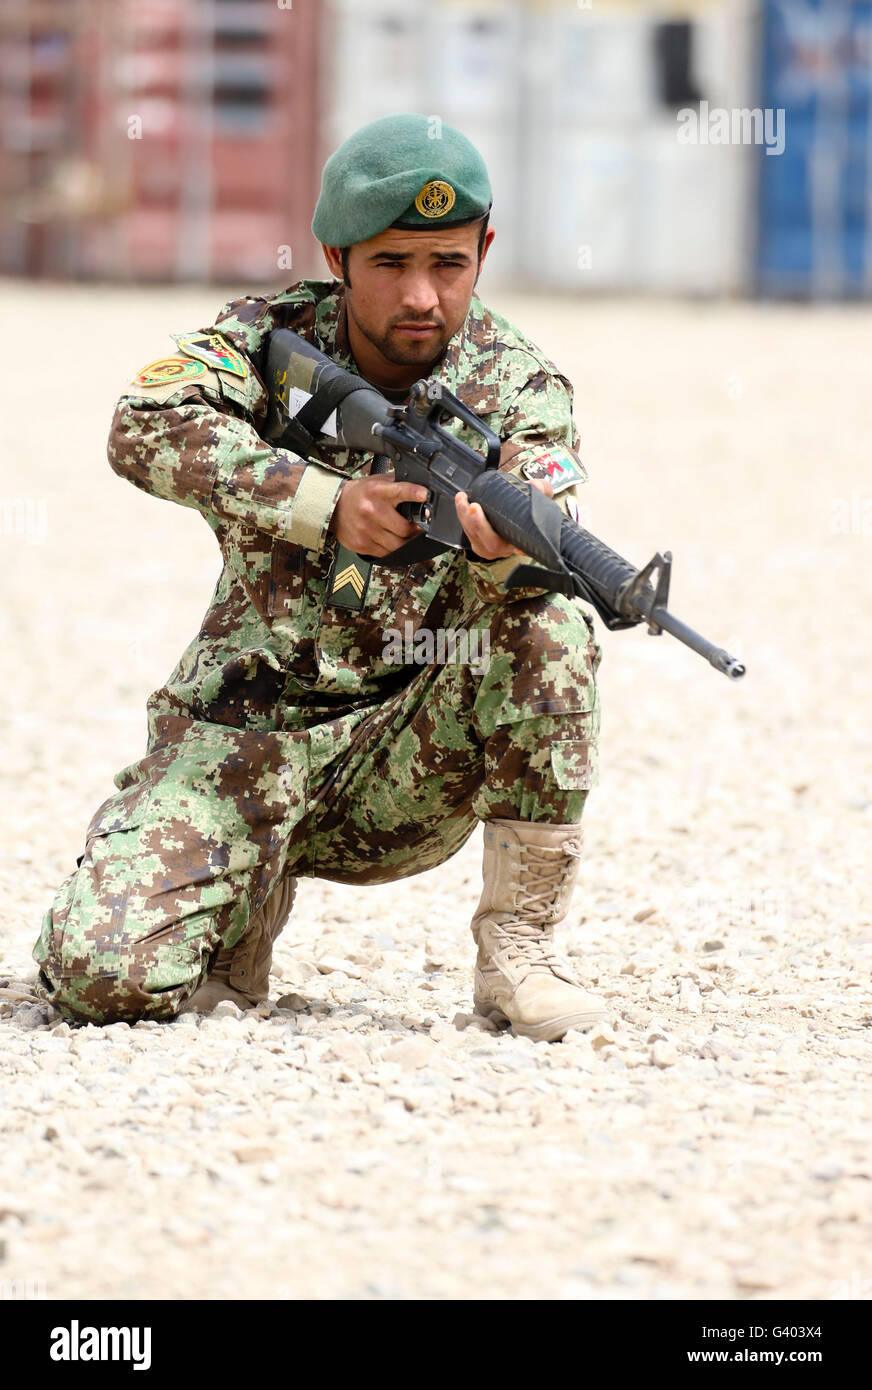 An Afghan National Army soldier provides security. Stock Photo